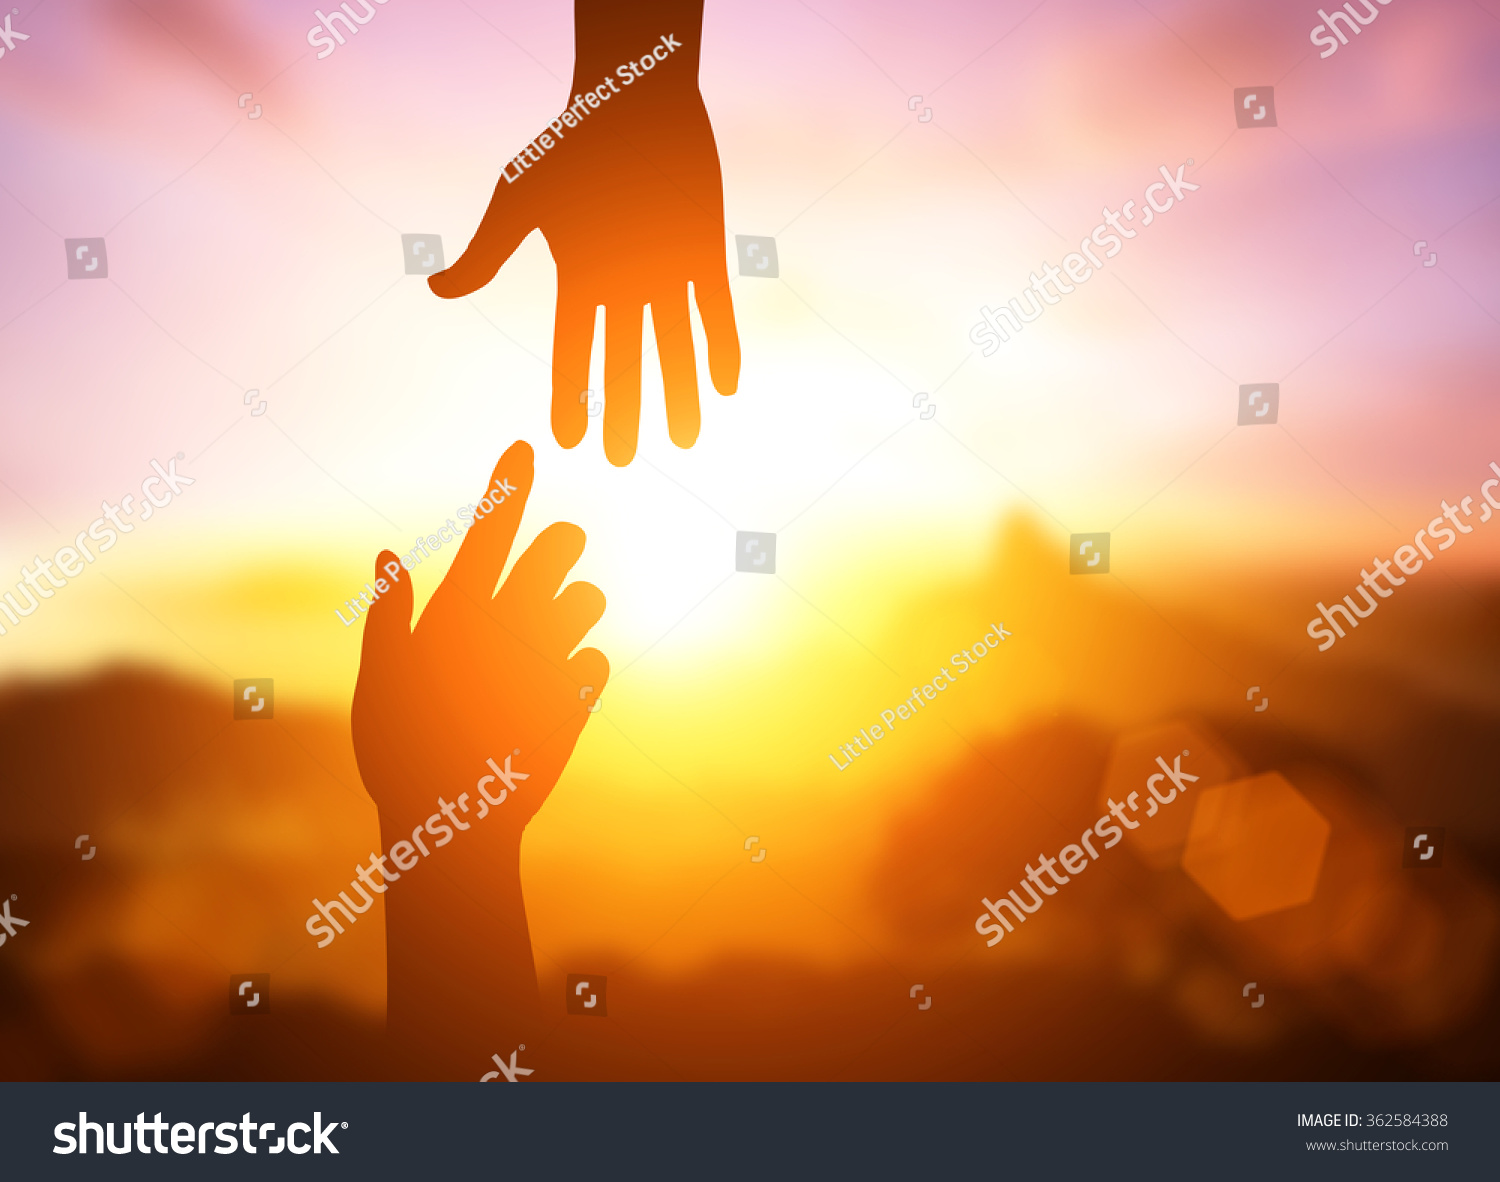 silhouette of helping hand concept and international day of peace.Thank You For Your Support. how can i help you. international day of peace.develop a friendship.please help me. #362584388